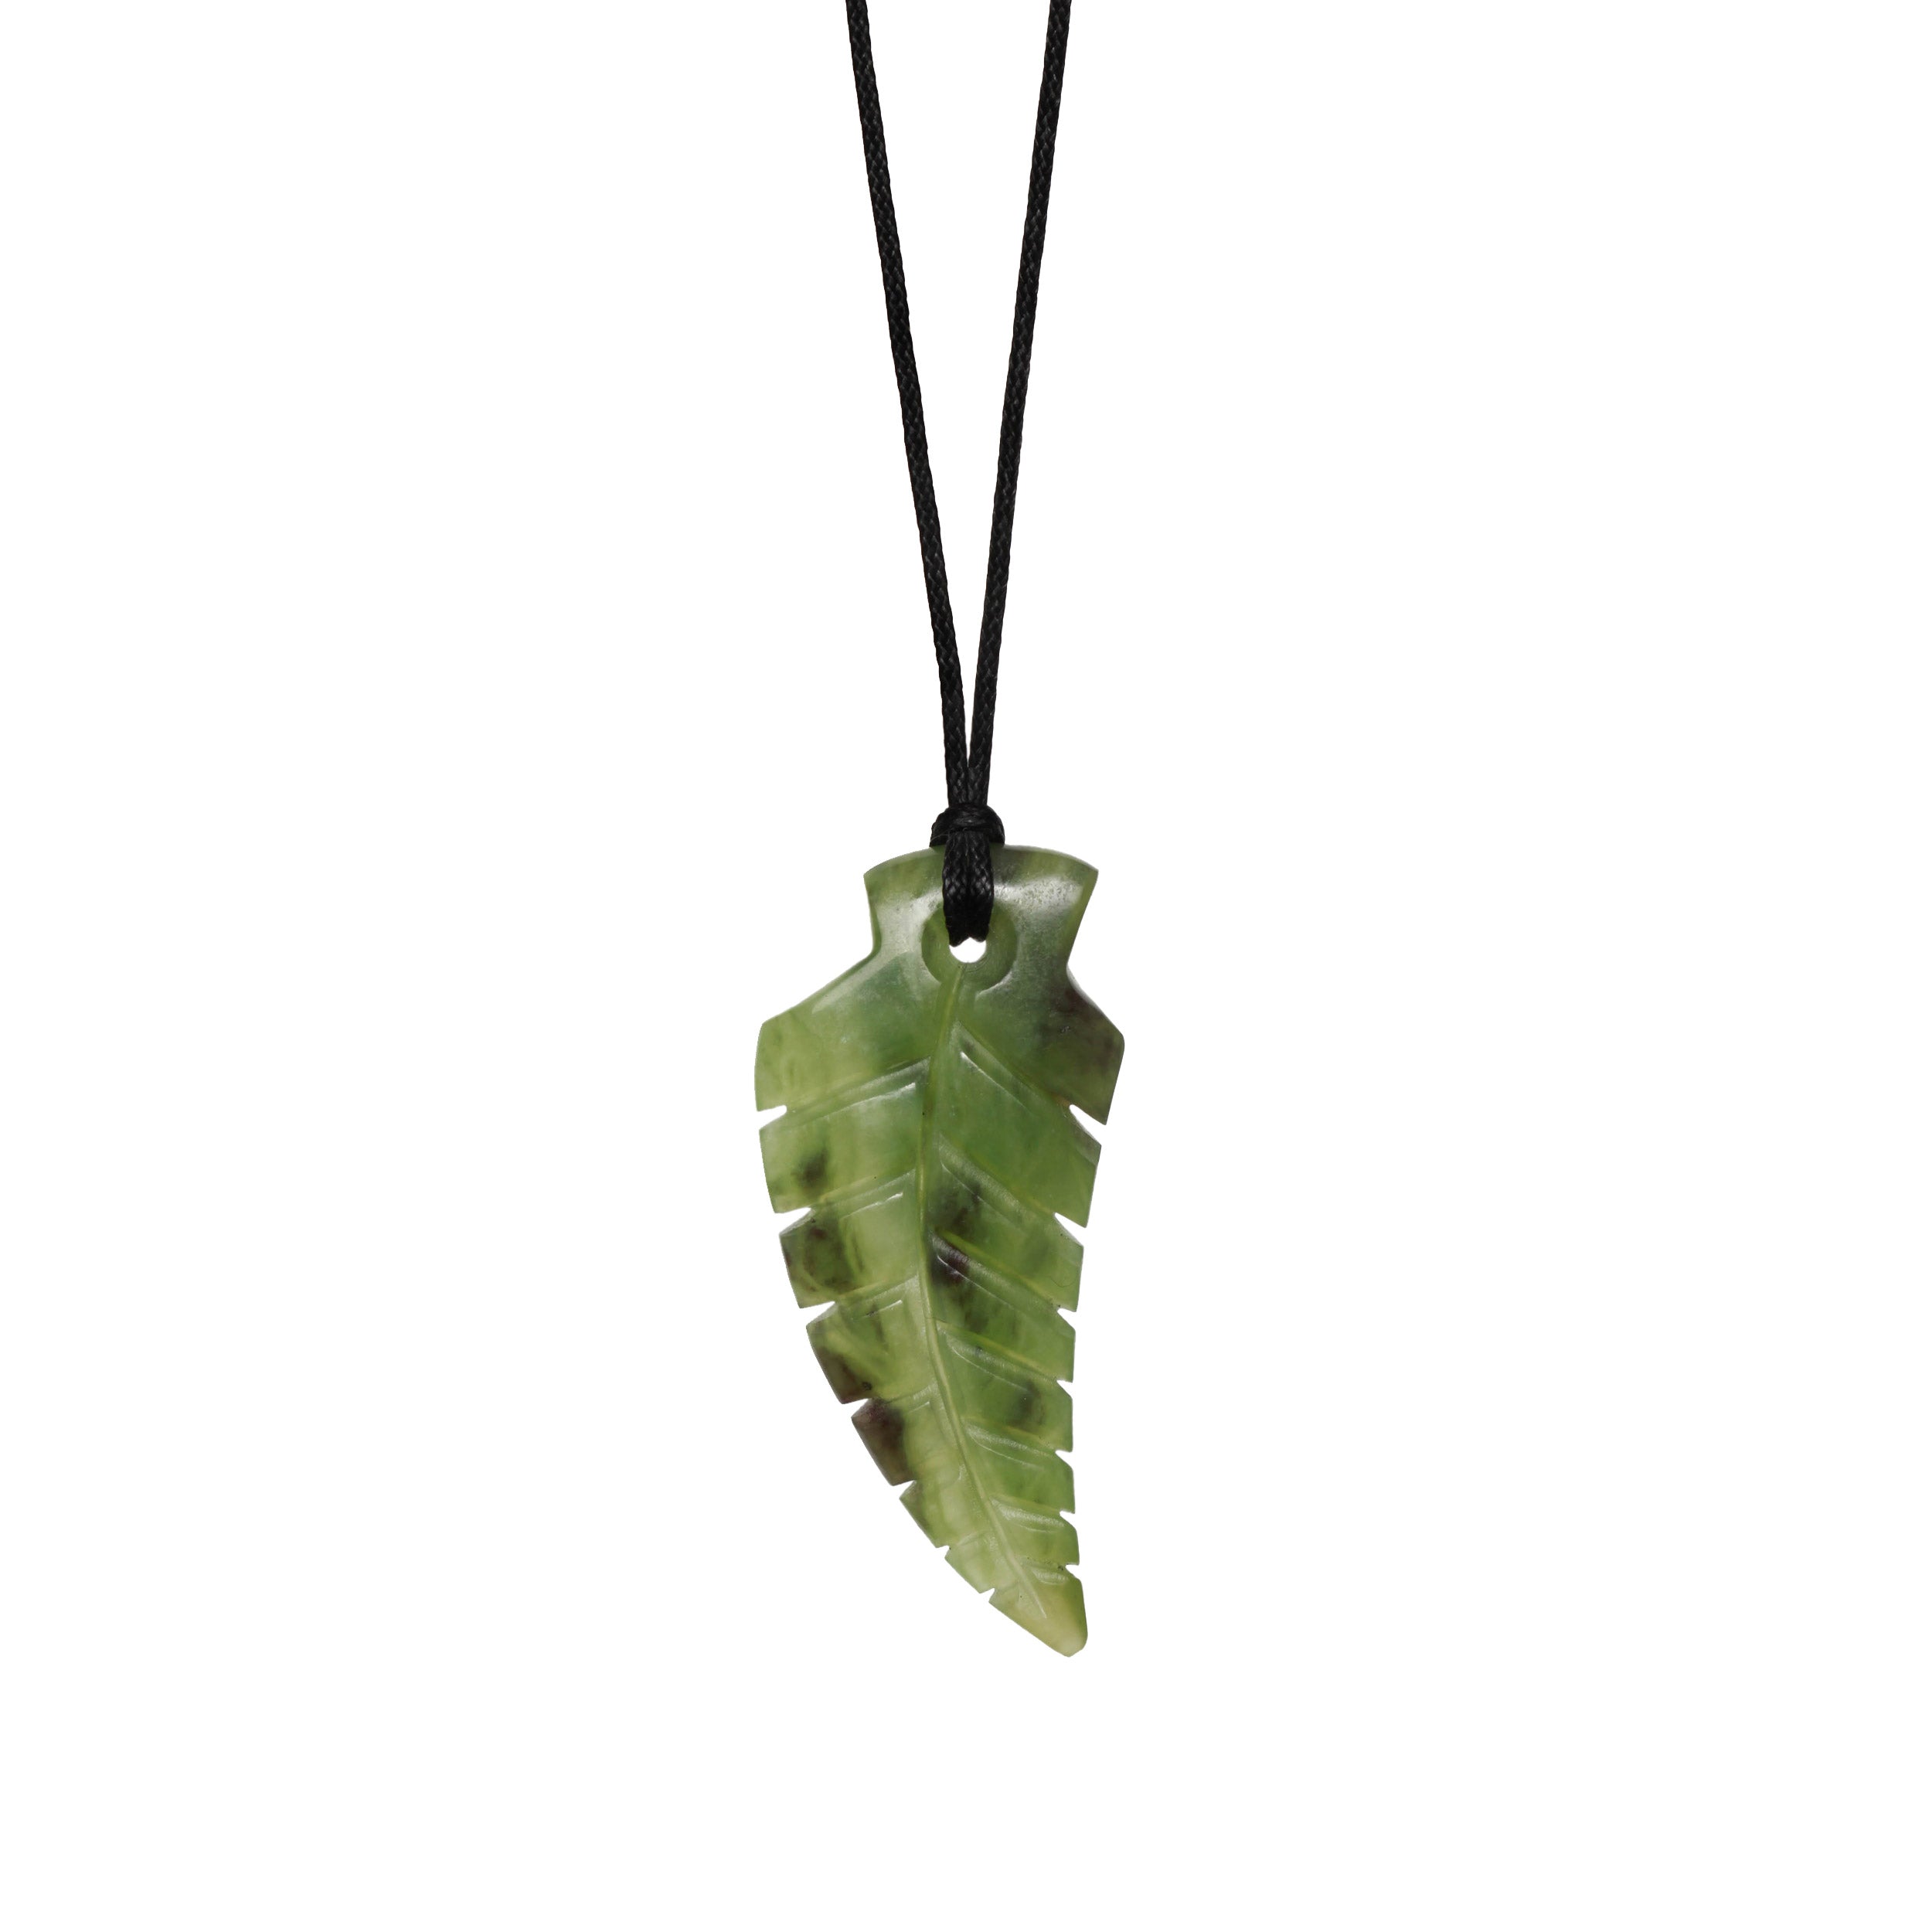 Fern Leaf Charms, Large Long Fern Leaf Pendant Beads, up to 4 Pcs, Antique  Silver 28x63mm CM0753S 